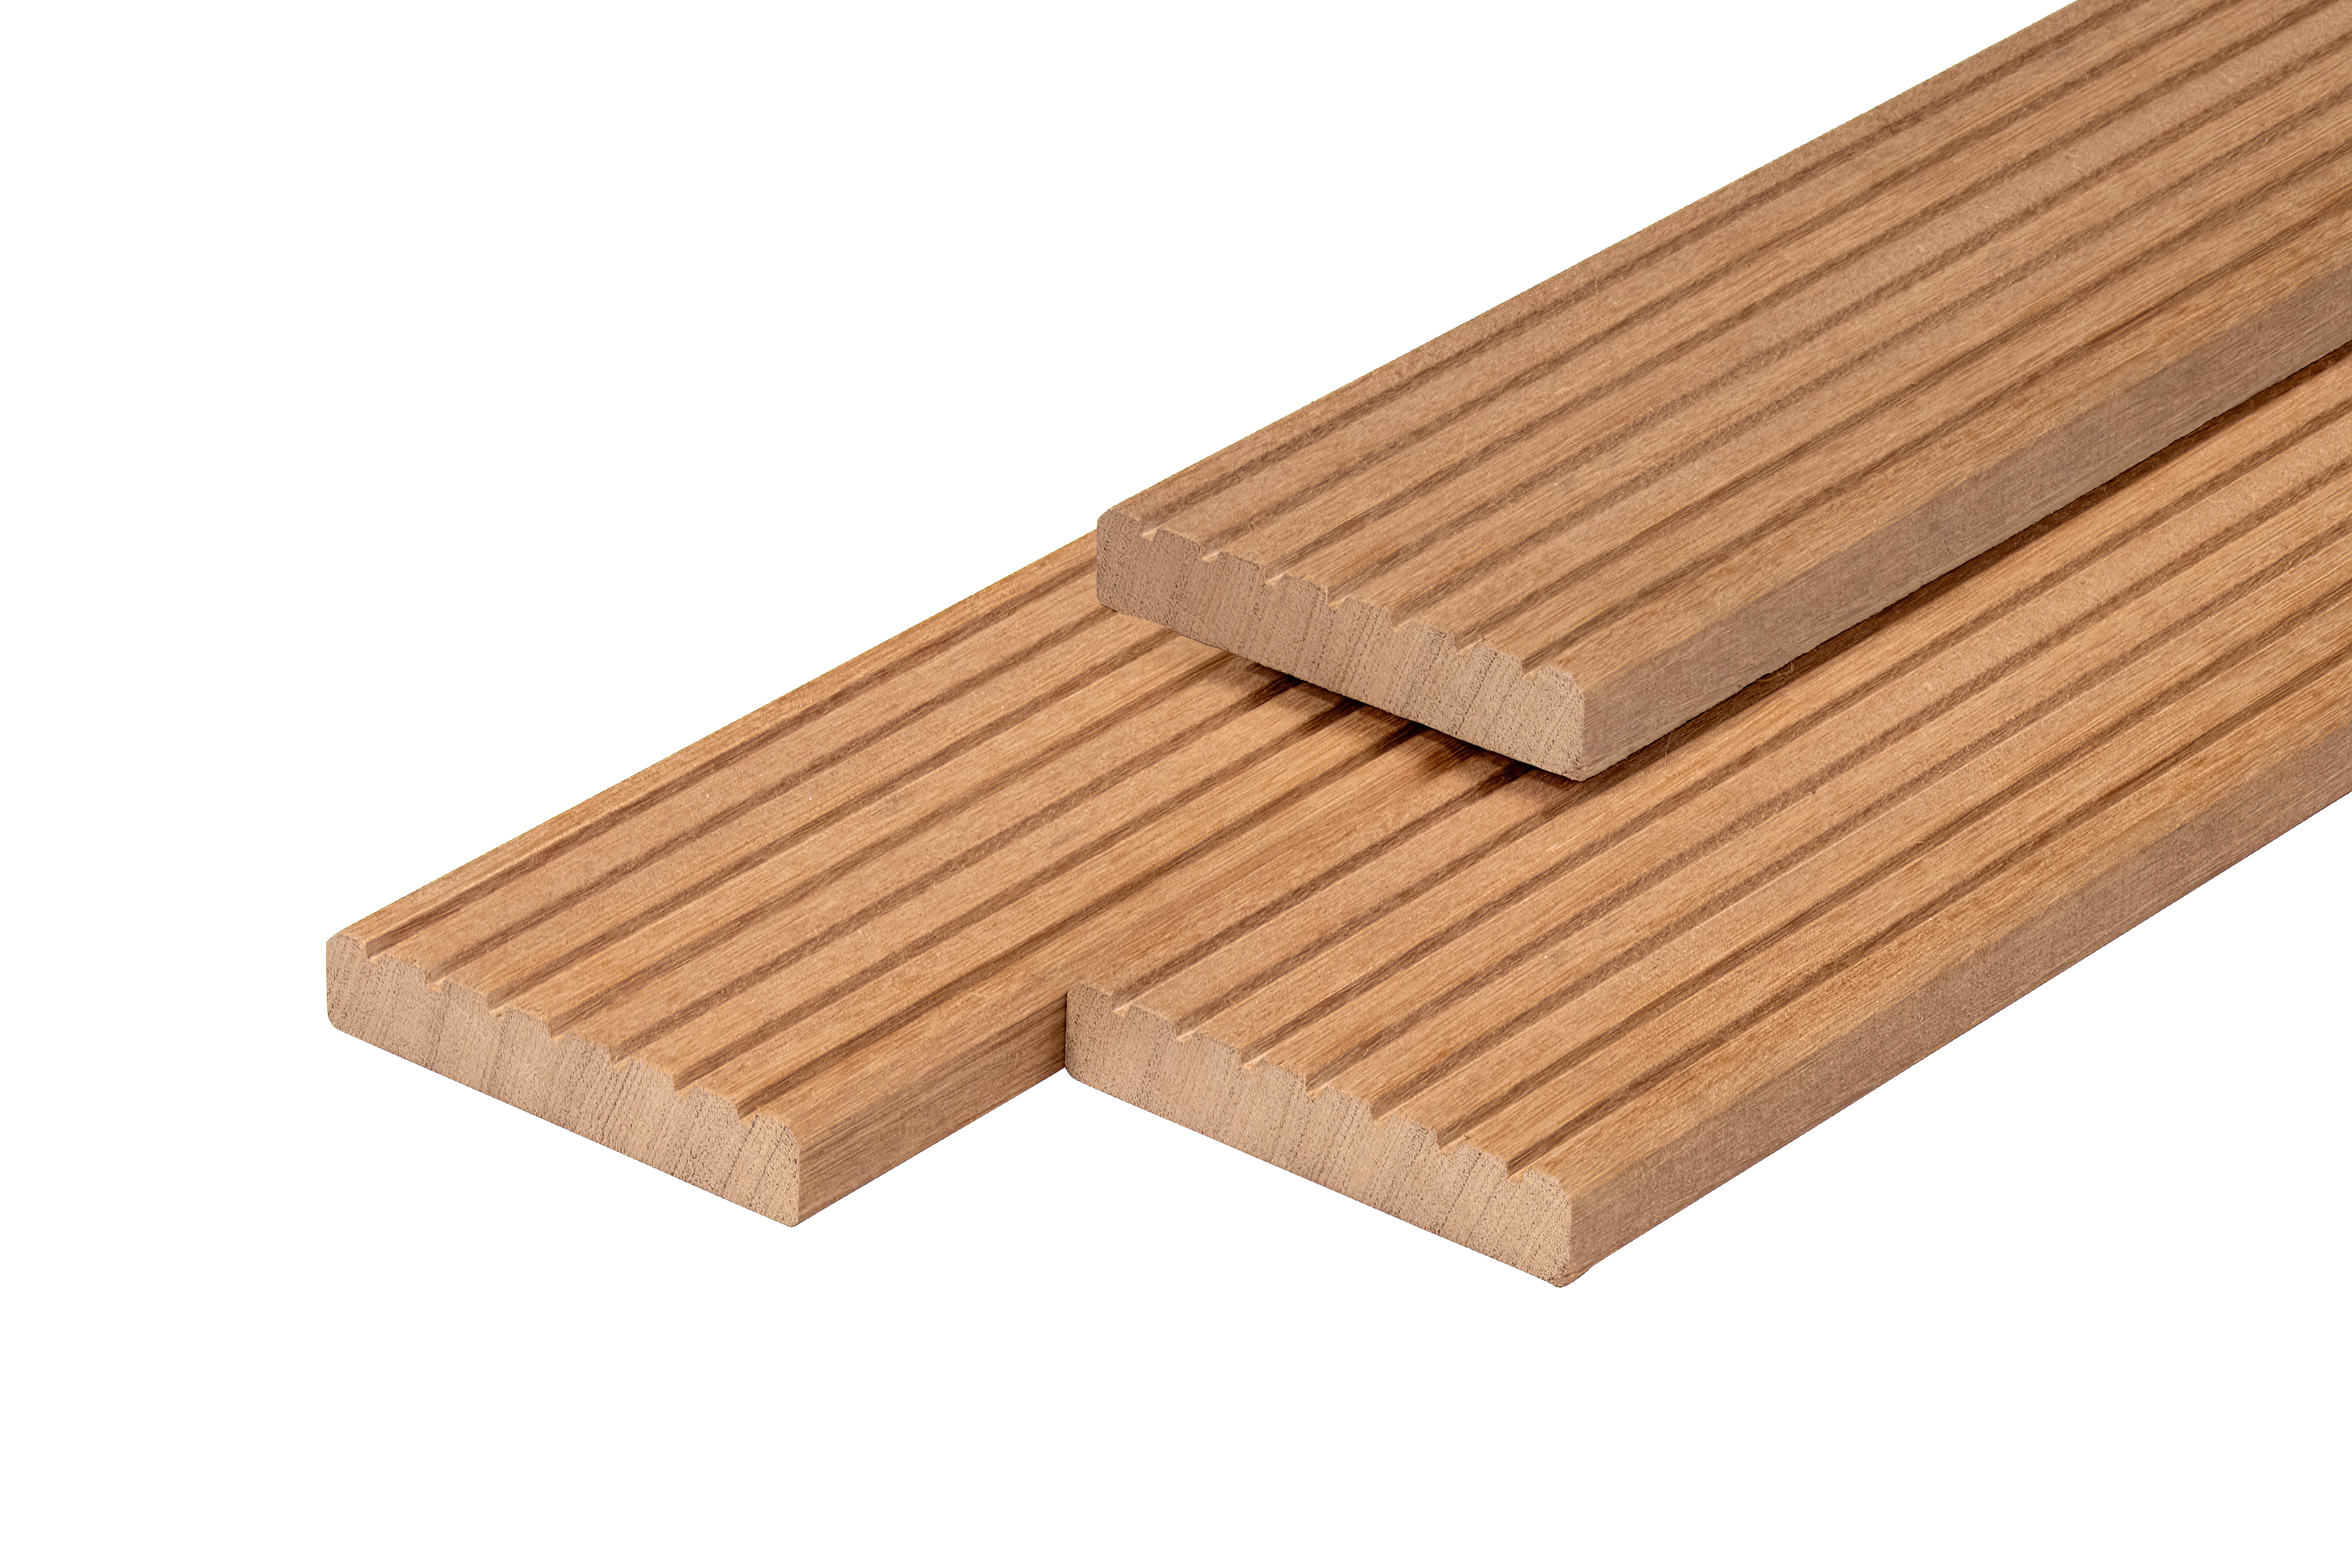 Bangkirai decking board dried 2.5x14.5x335 cm planed 7 grooves + 1 side smooth